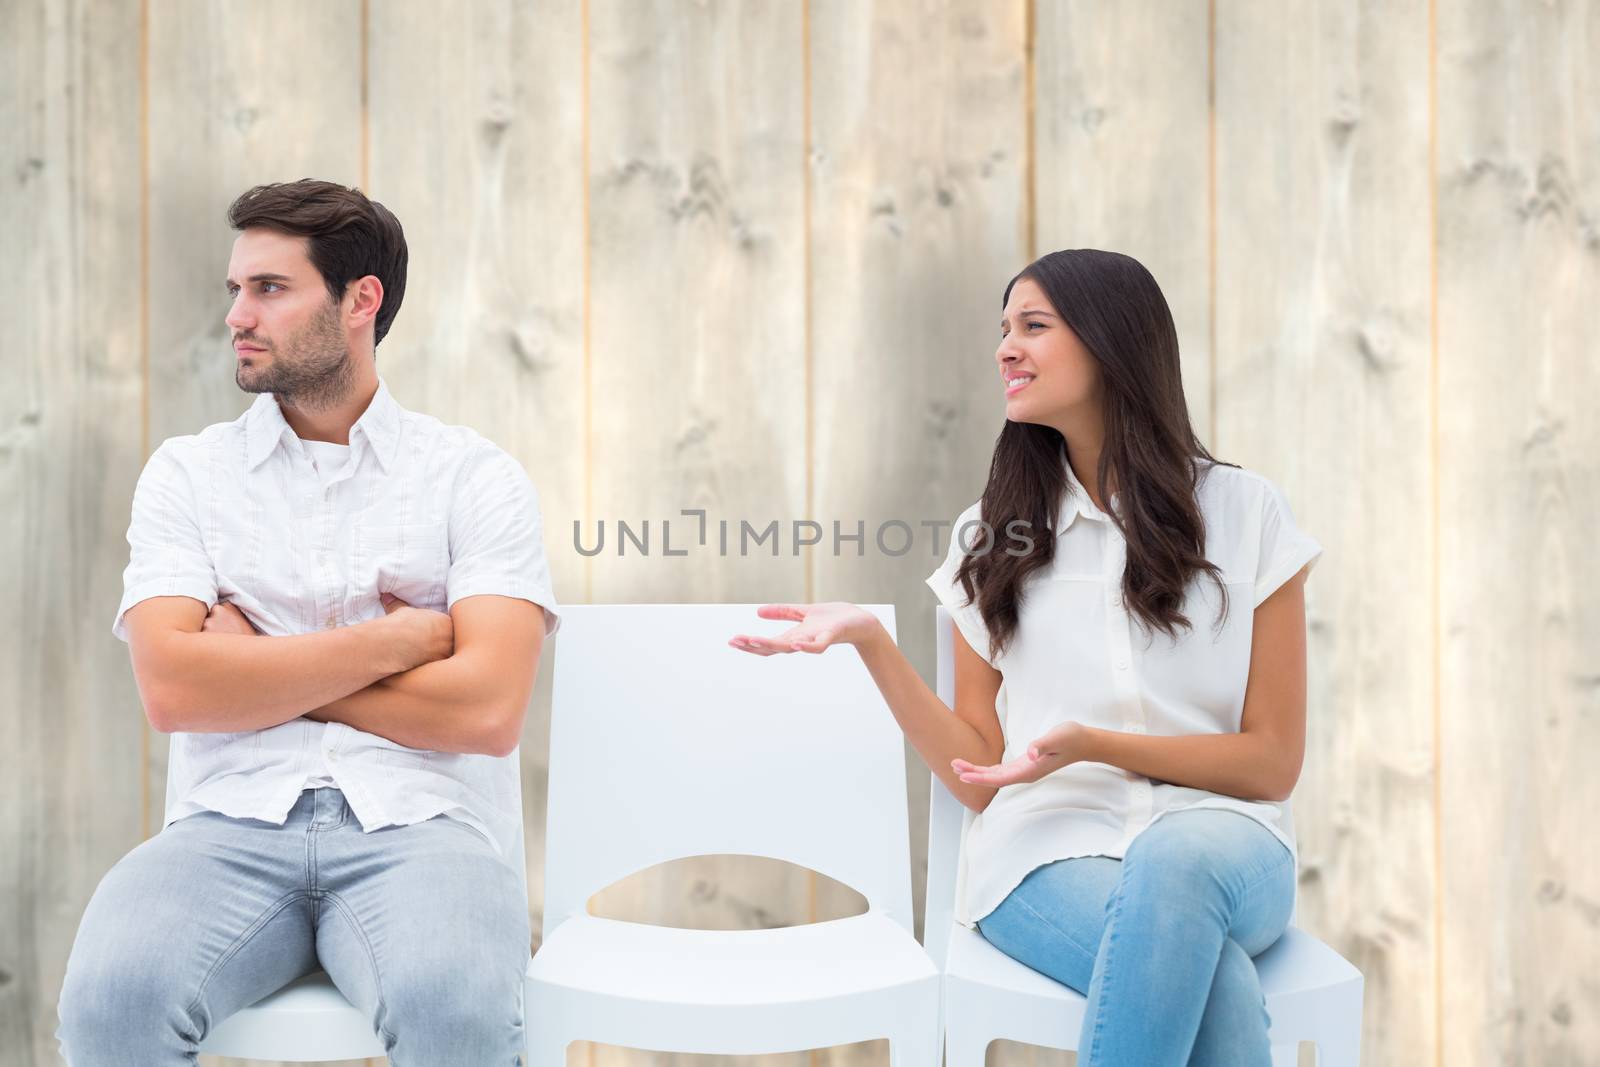 Brunette pleading with angry boyfriend against pale wooden planks